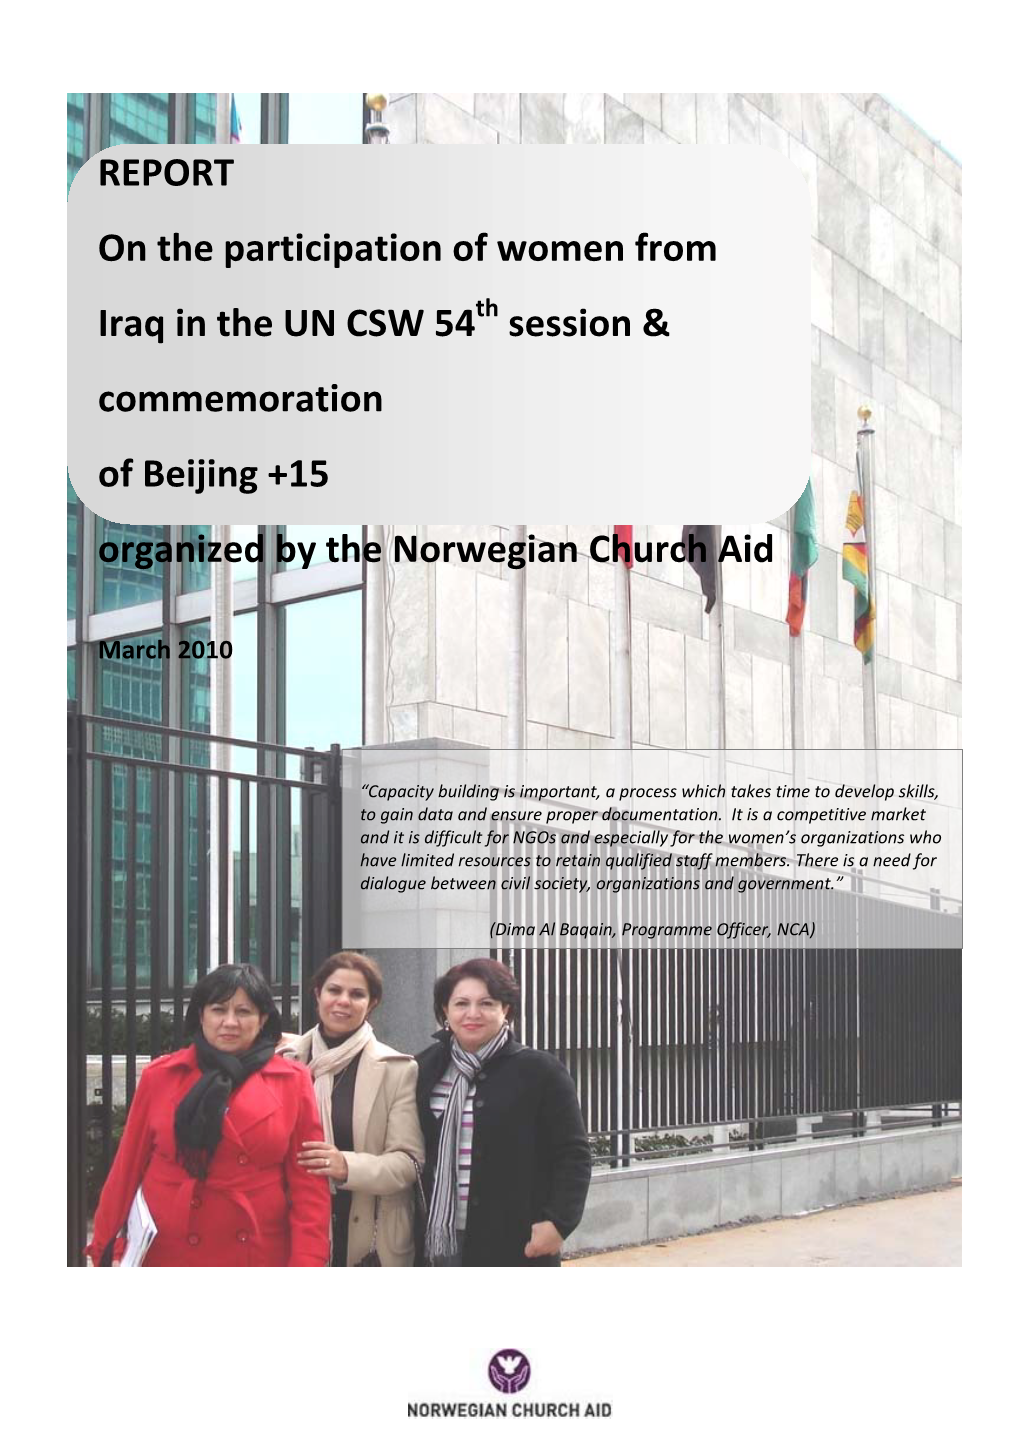 REPORT on the Participation of Women from Iraq in the UN CSW 54Th Session & Commemoration of Beijing +15 Organized by the Norwegian Church Aid